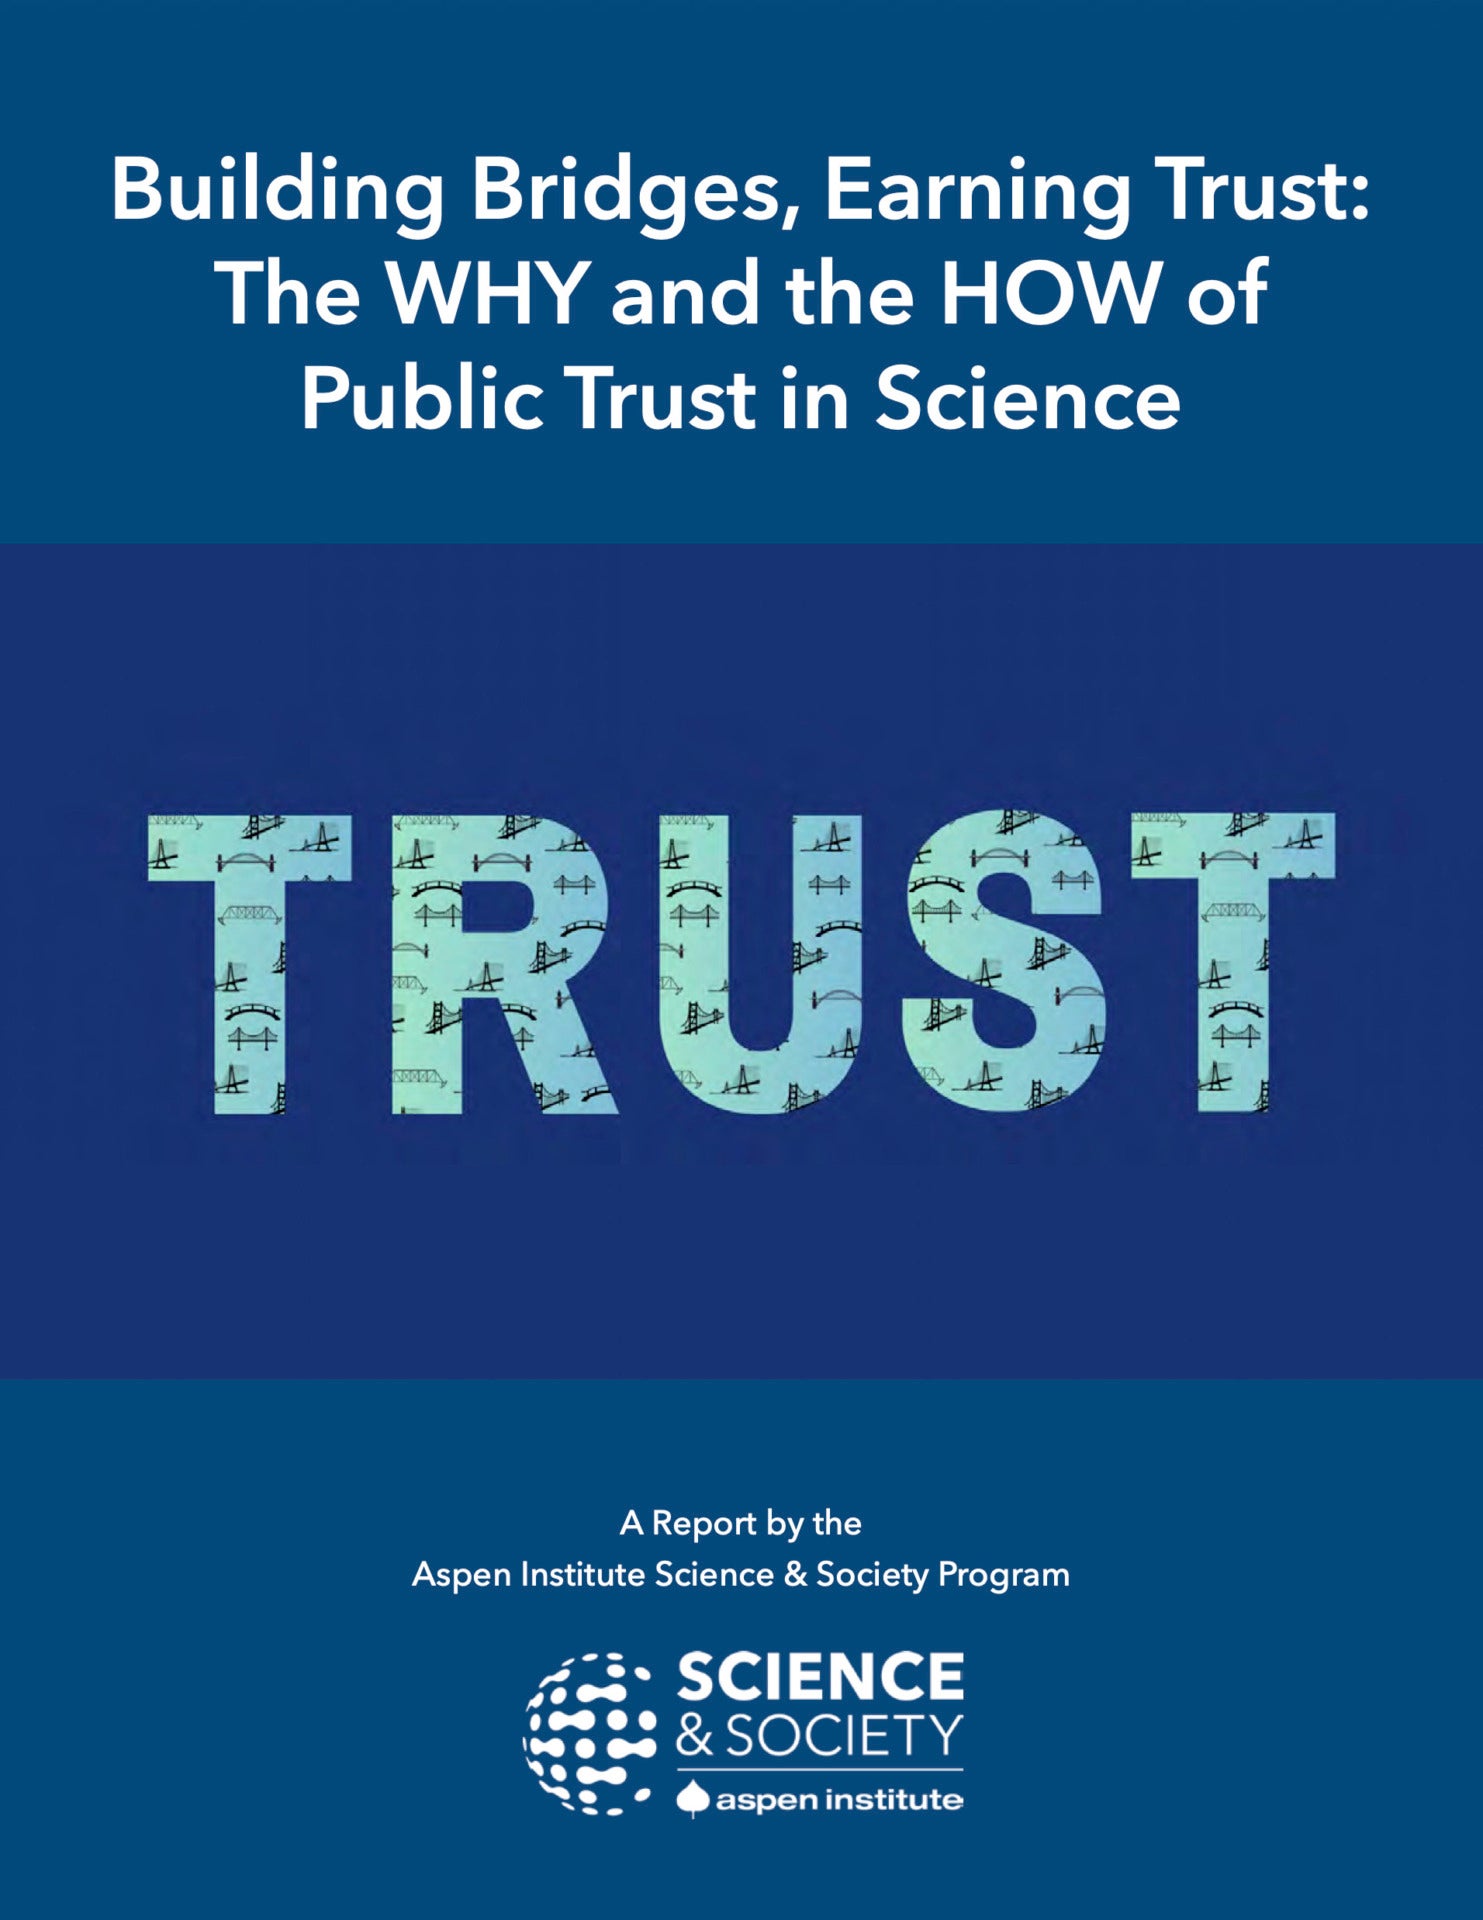 The WHY and the HOW of Public Trust in Science